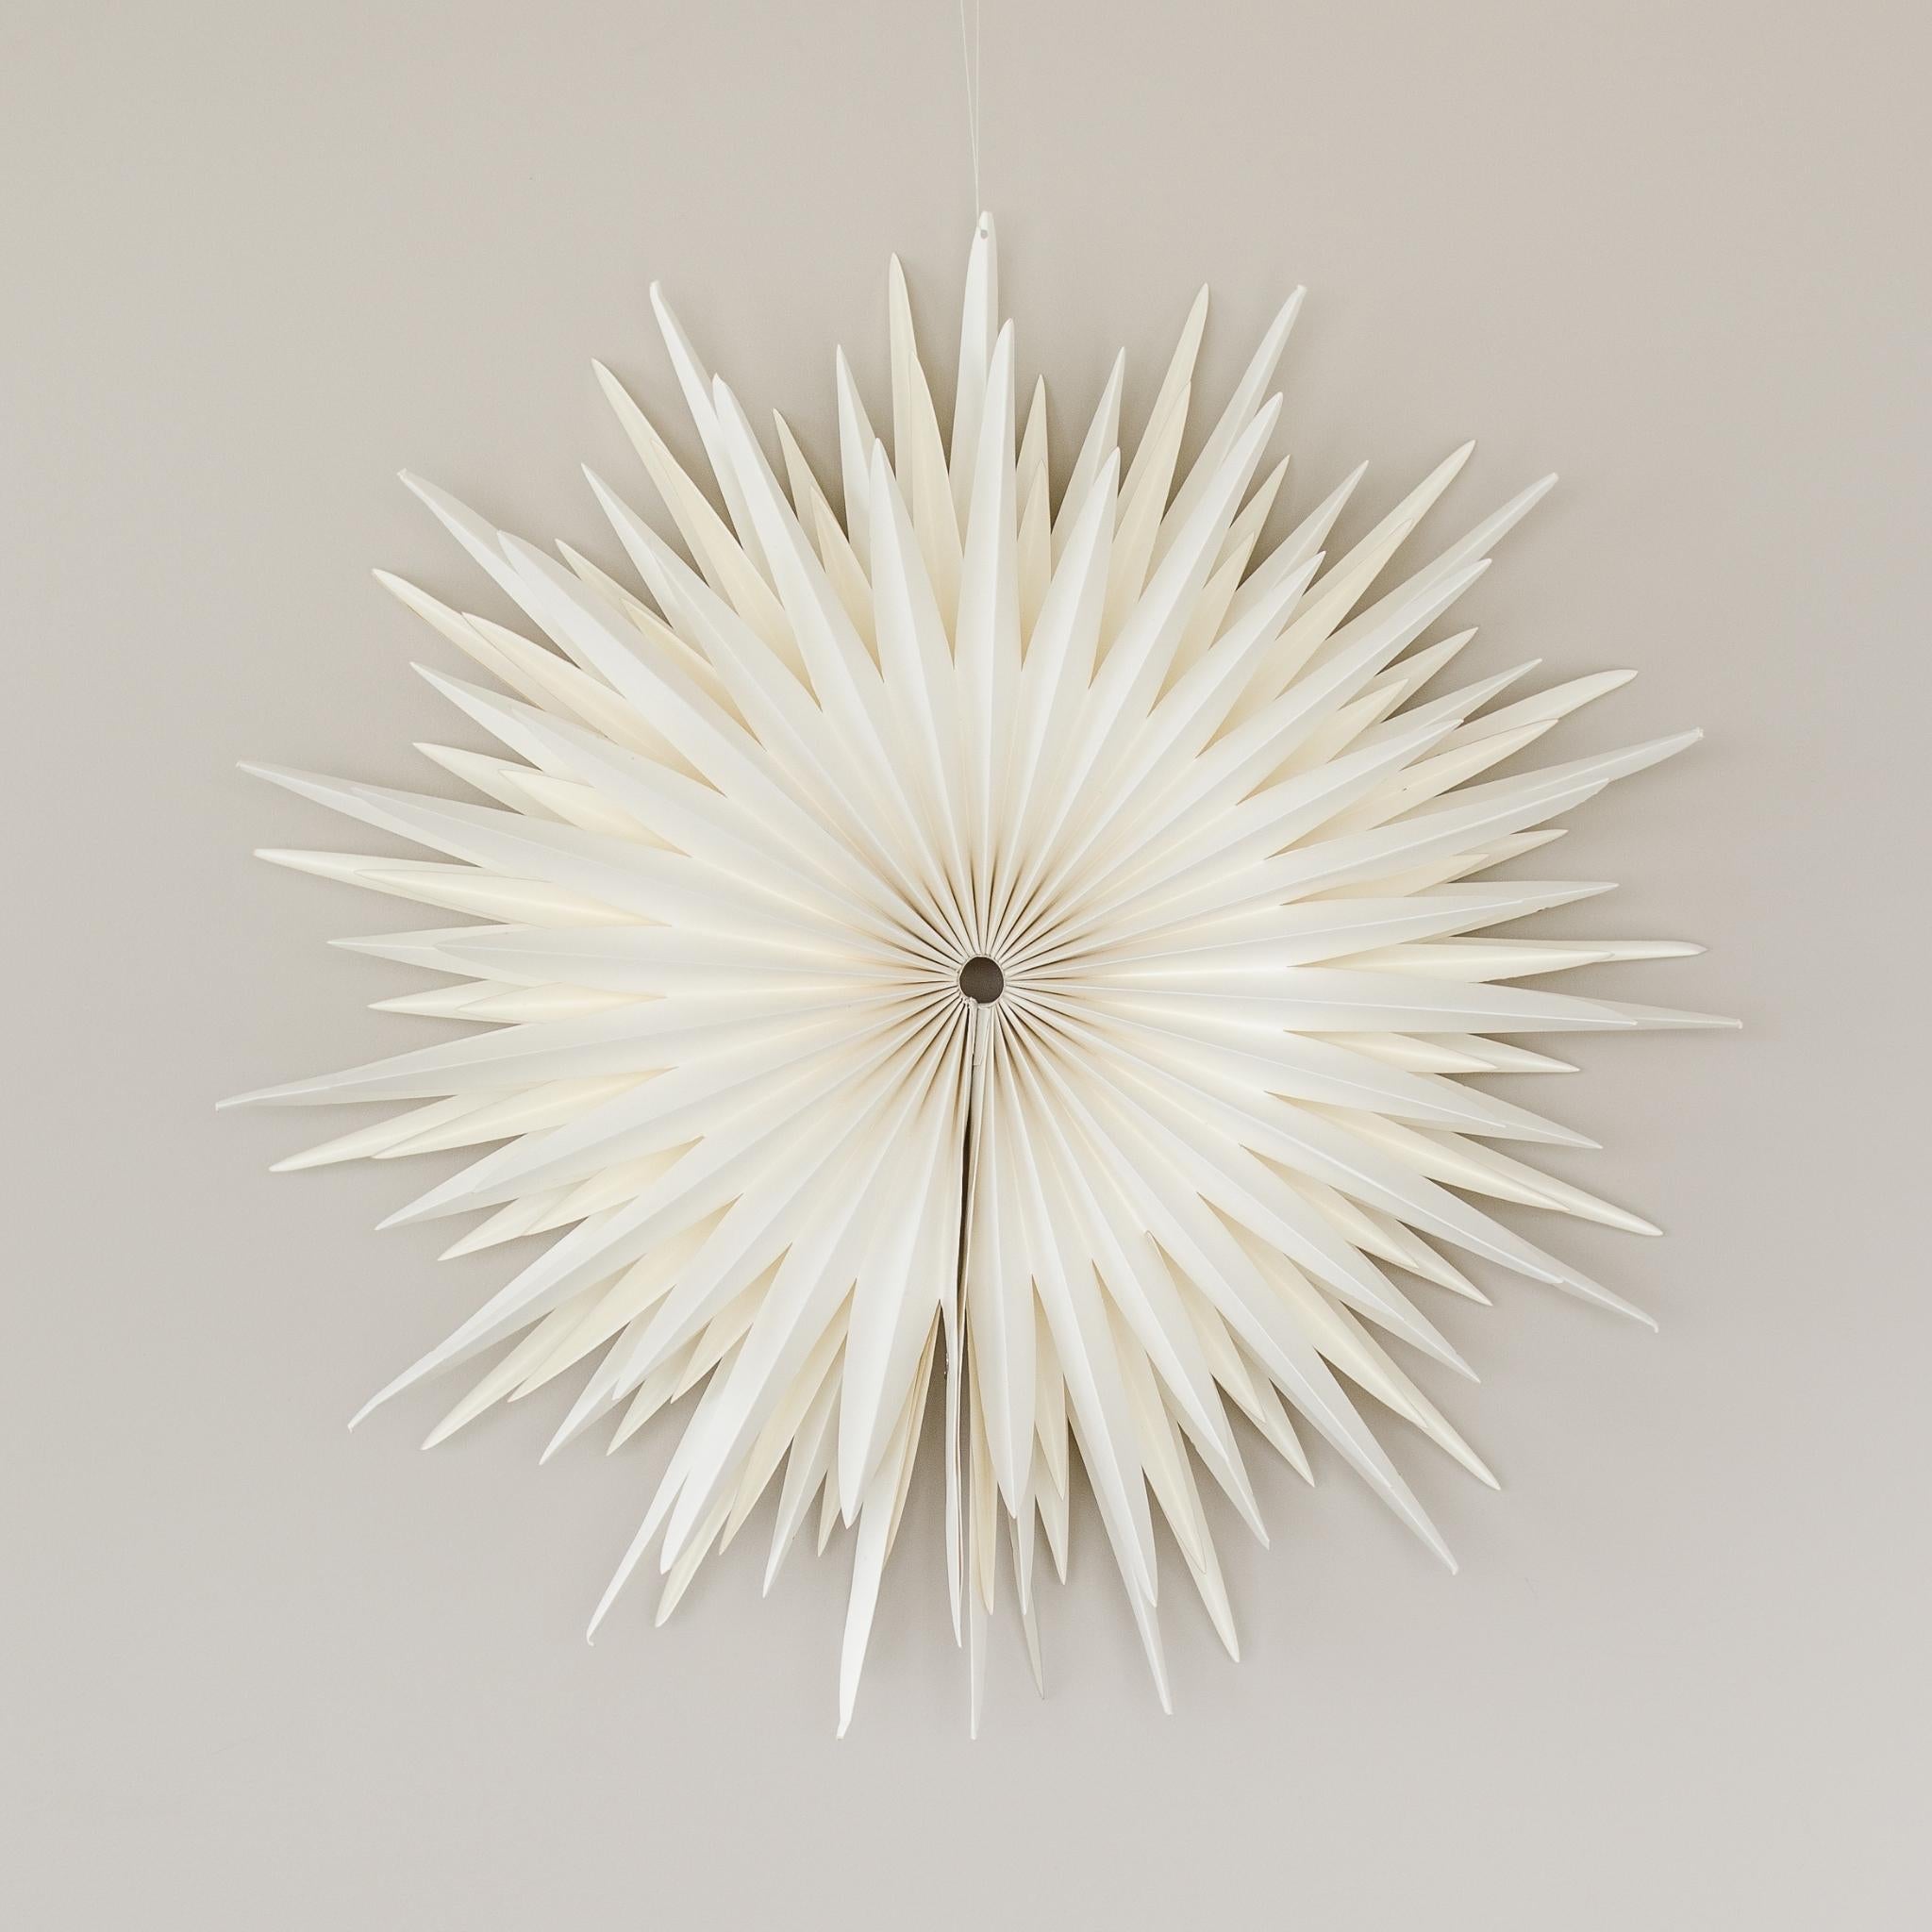 Off-White Star Wall Hanging in 70cm diameter hanging on a beige wall